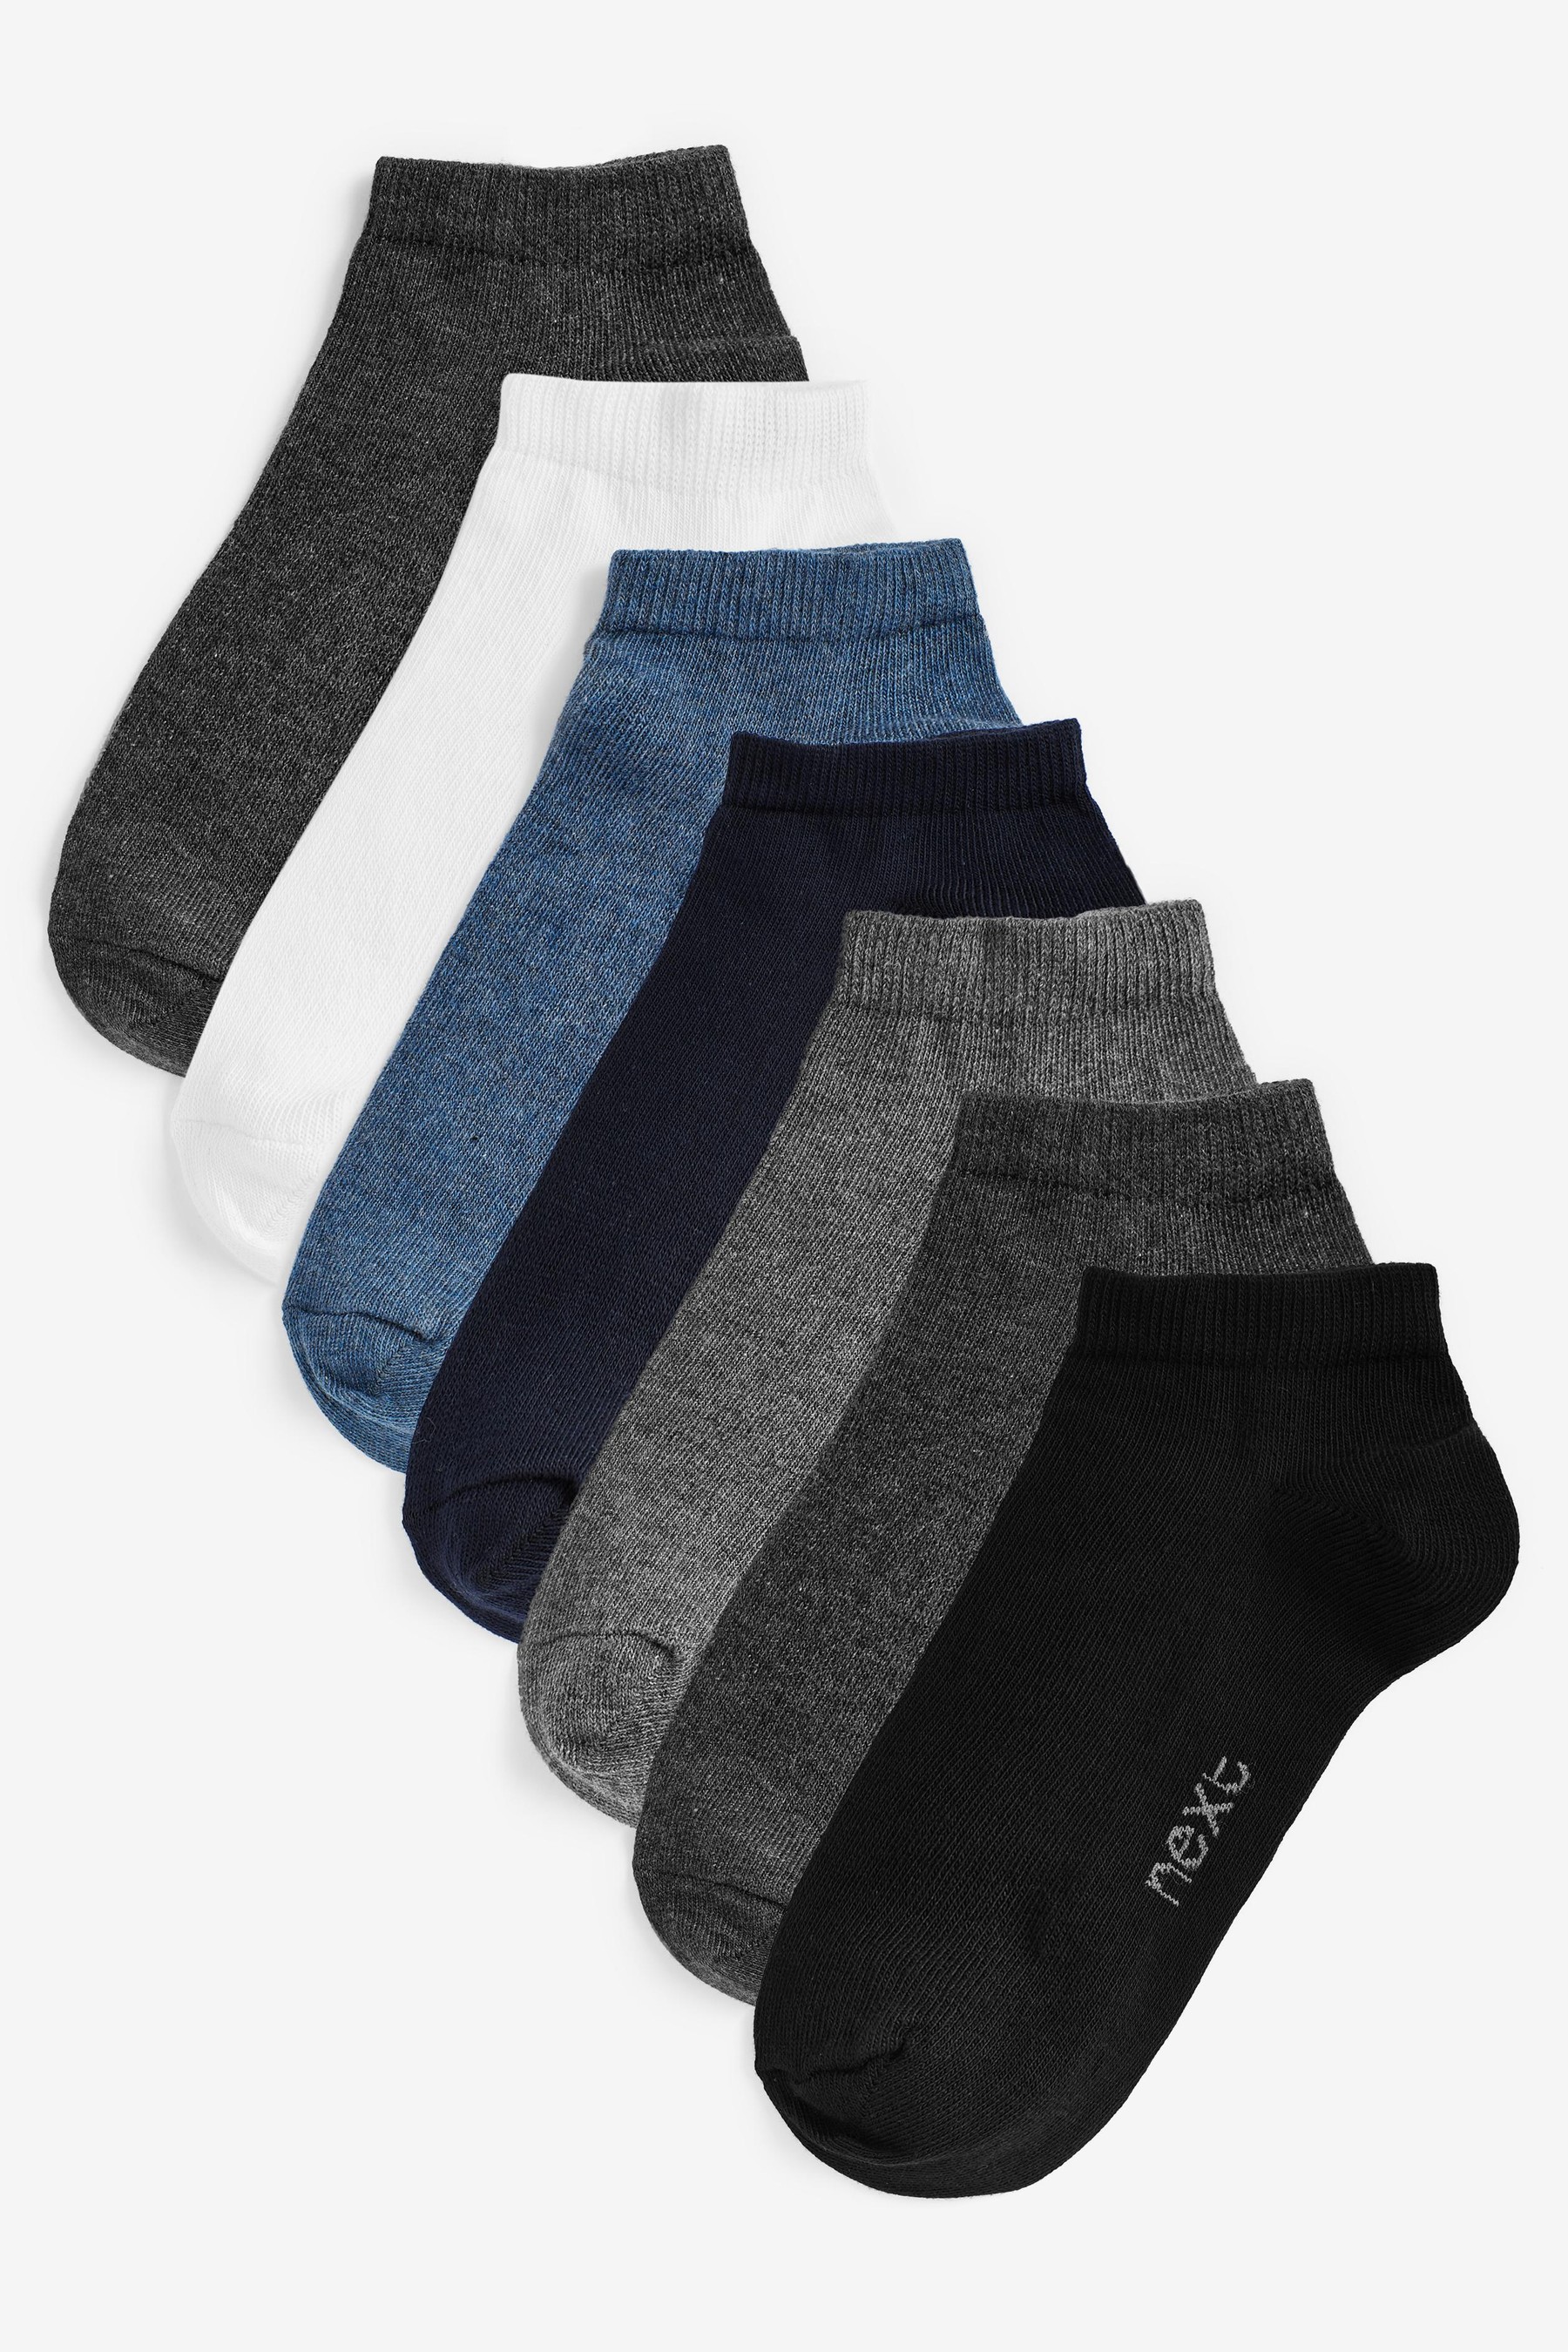 Buy Multi 7 Pack Cotton Rich Trainer Socks from the Next UK online shop